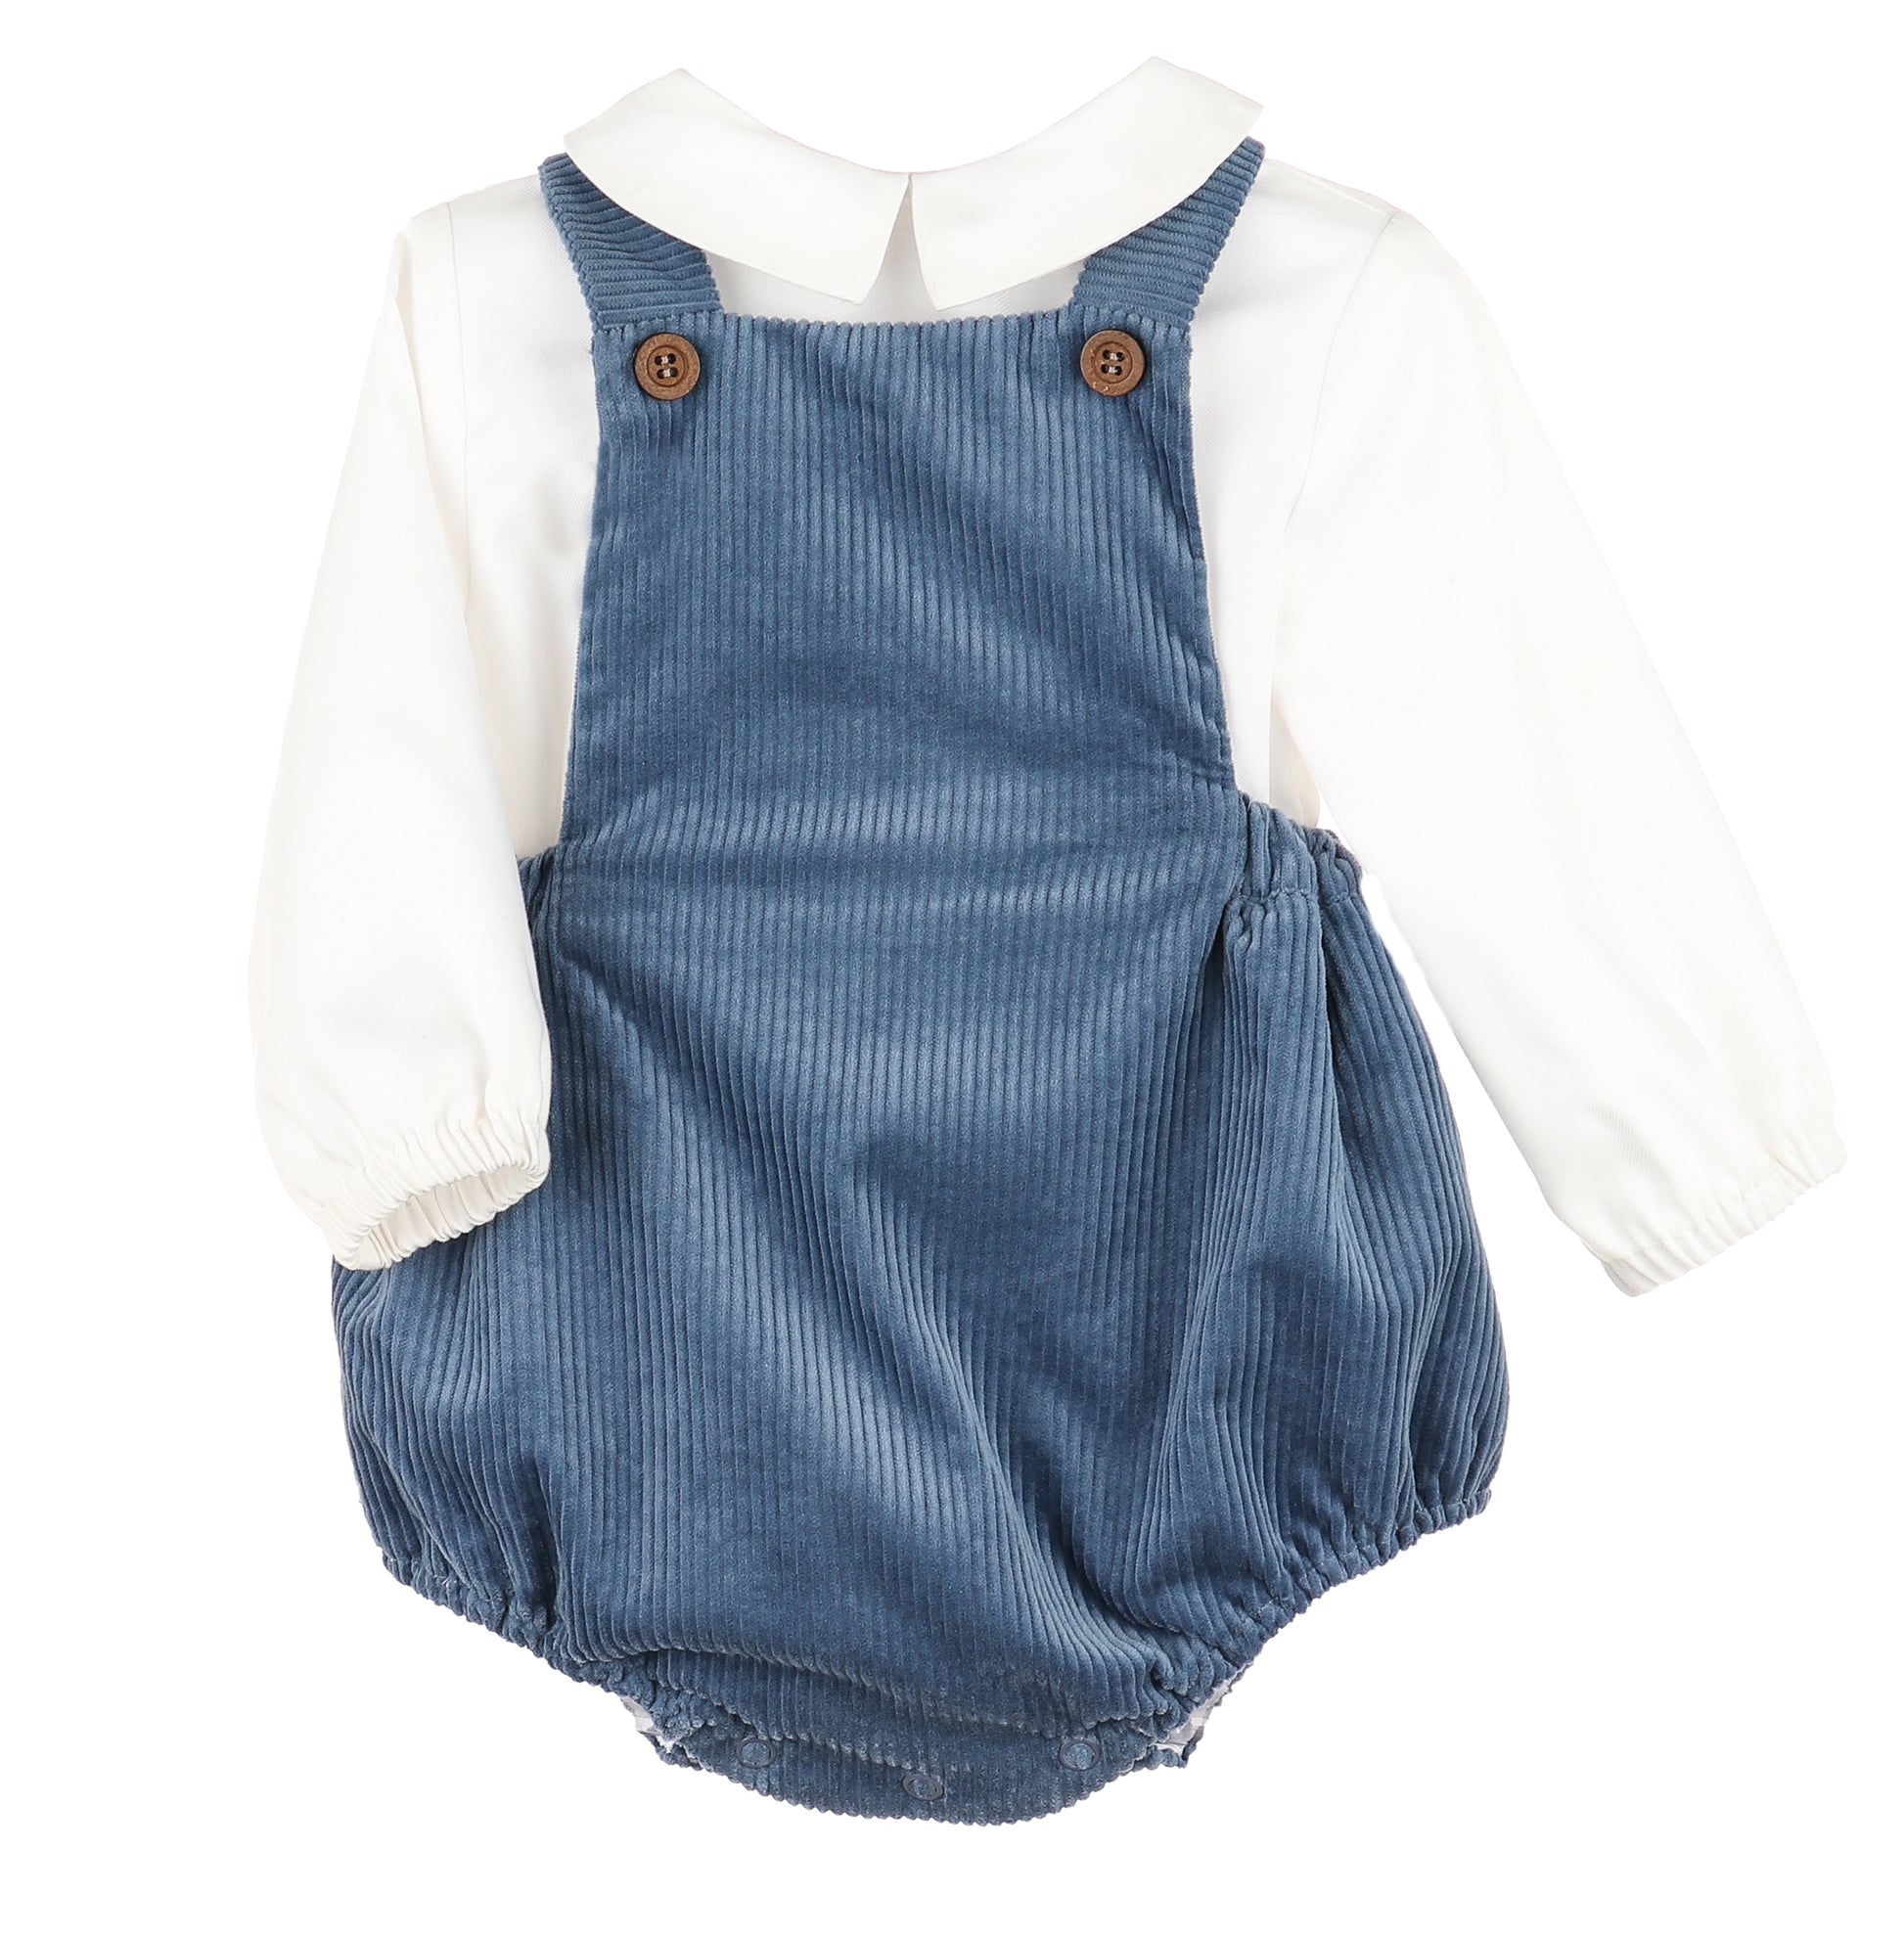 Sophie and Lucas Patrick Plush Cord Overall- Blue 